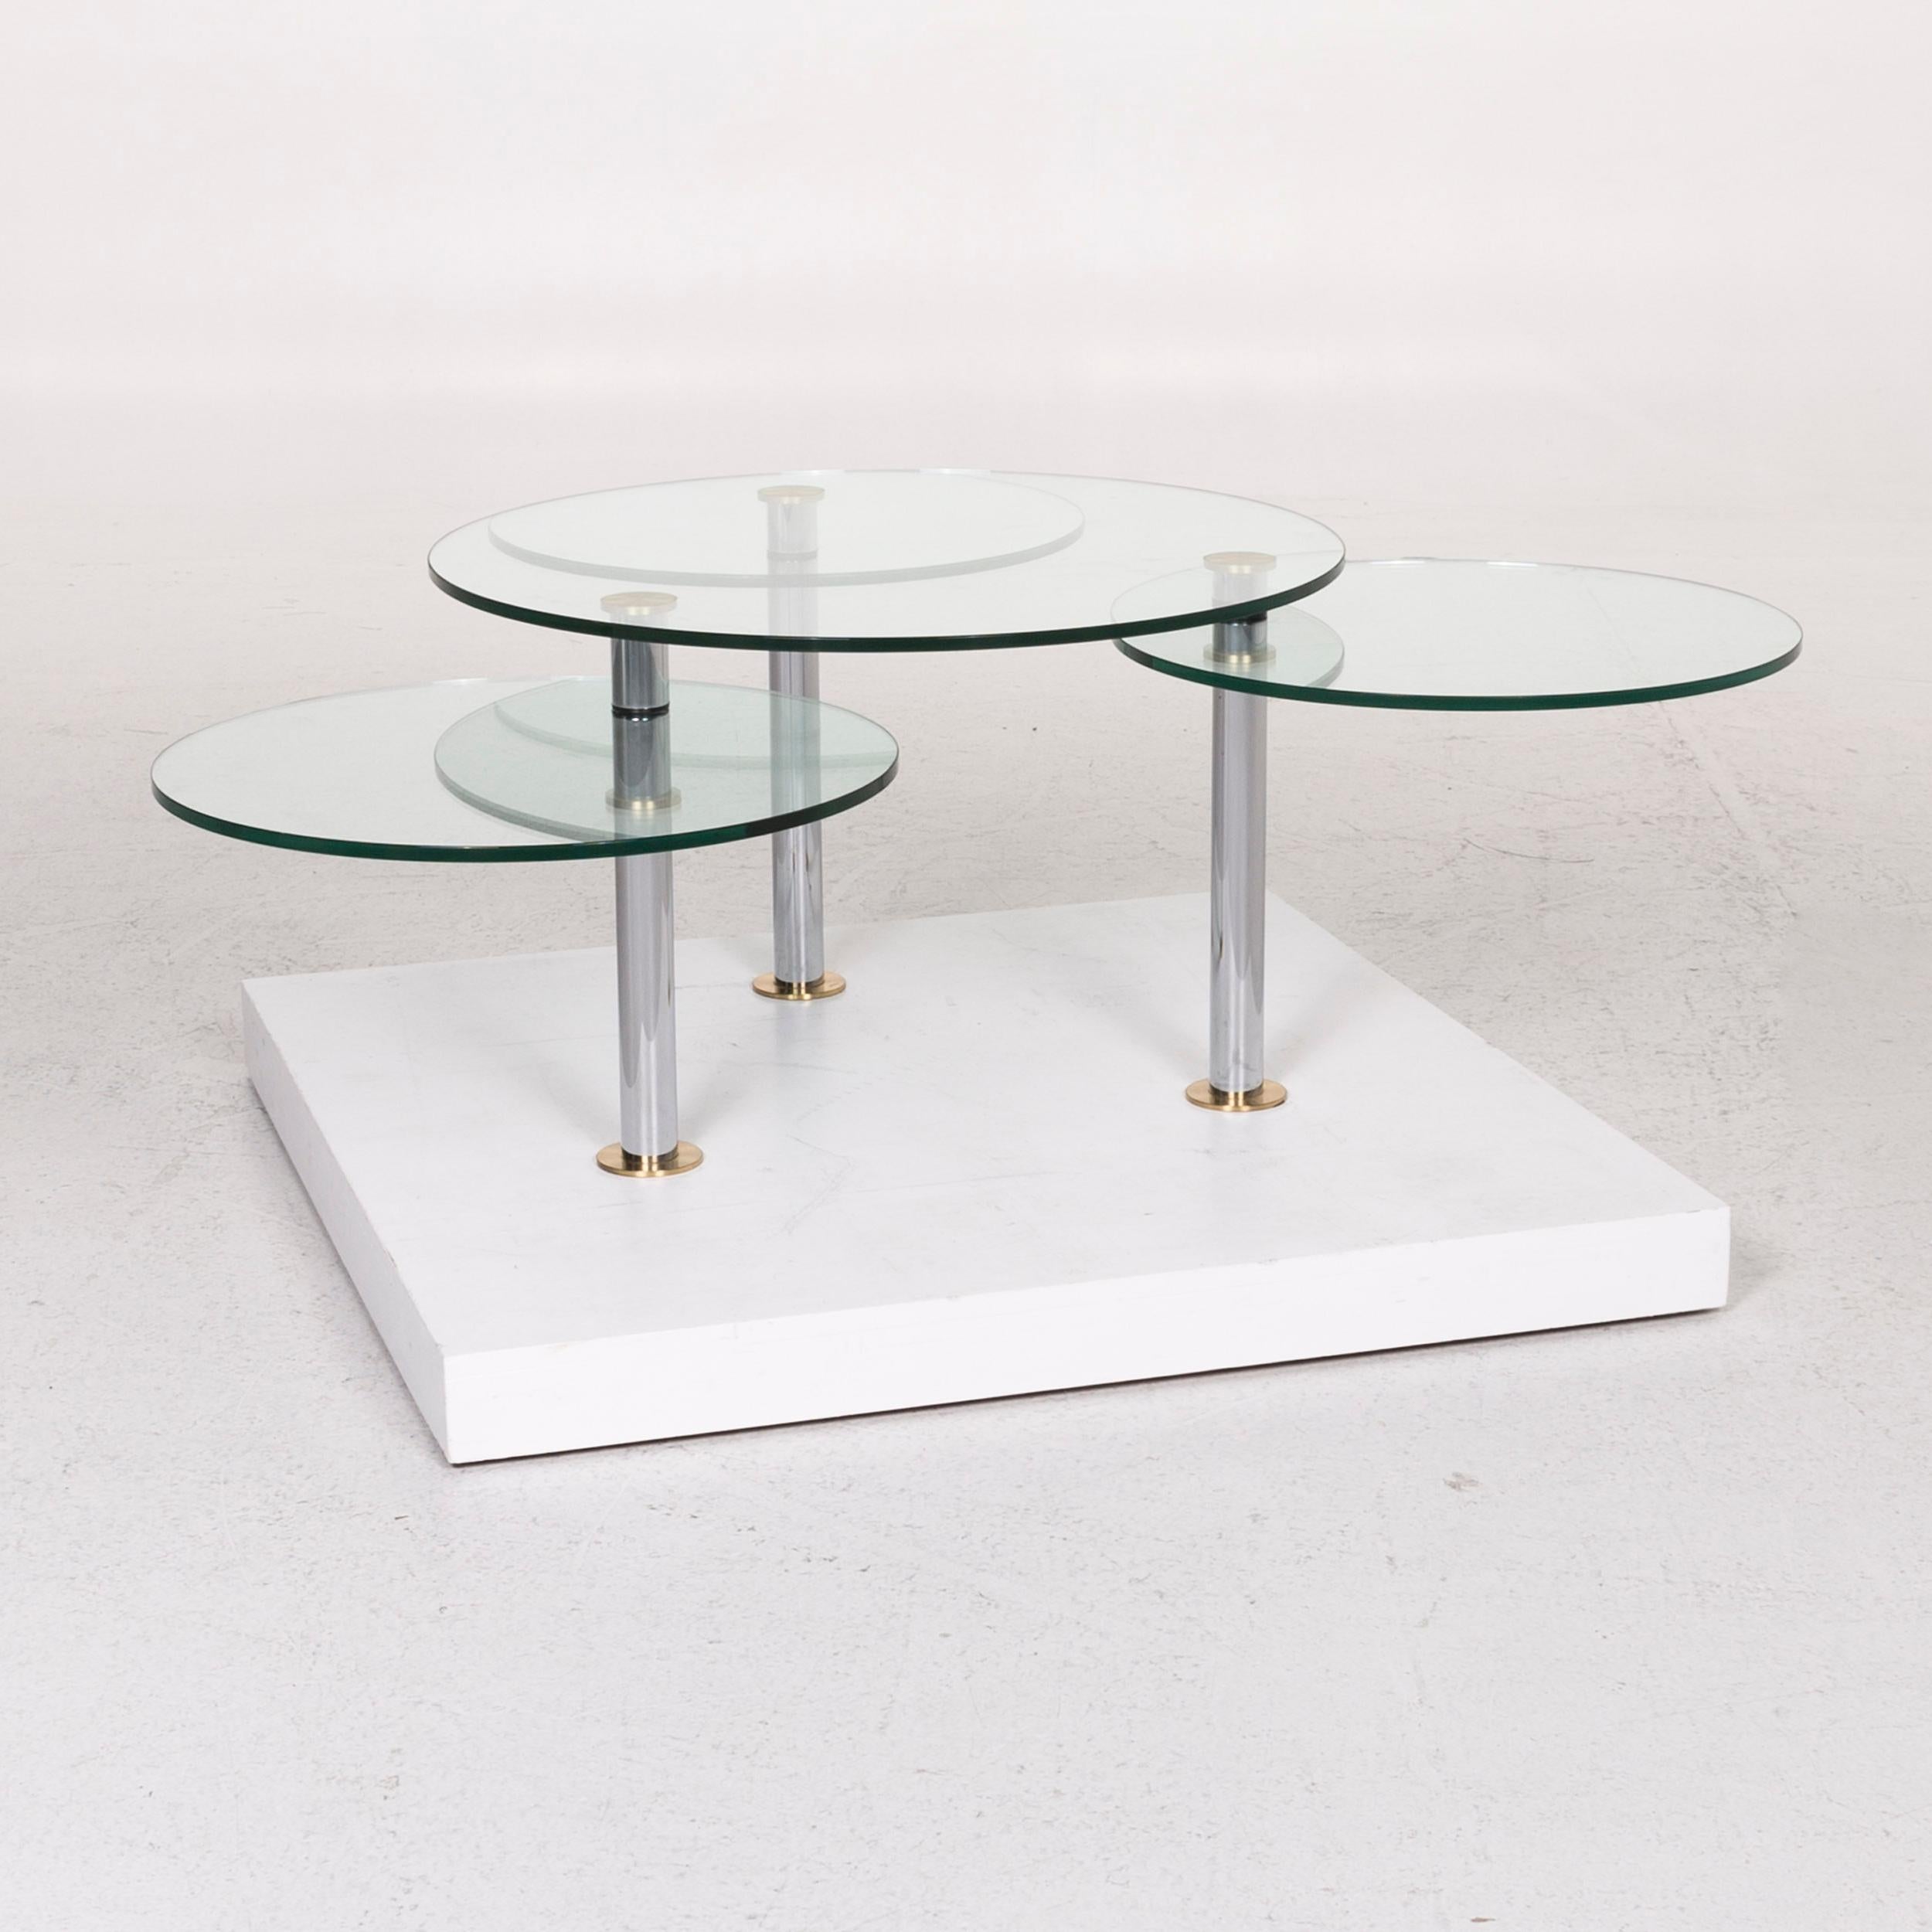 We bring to you a Draenert glass coffee table round table function flexible.
 

 Product measurements in centimeters:
 

Ddepth 78
 Width 75
 Height 45.





 